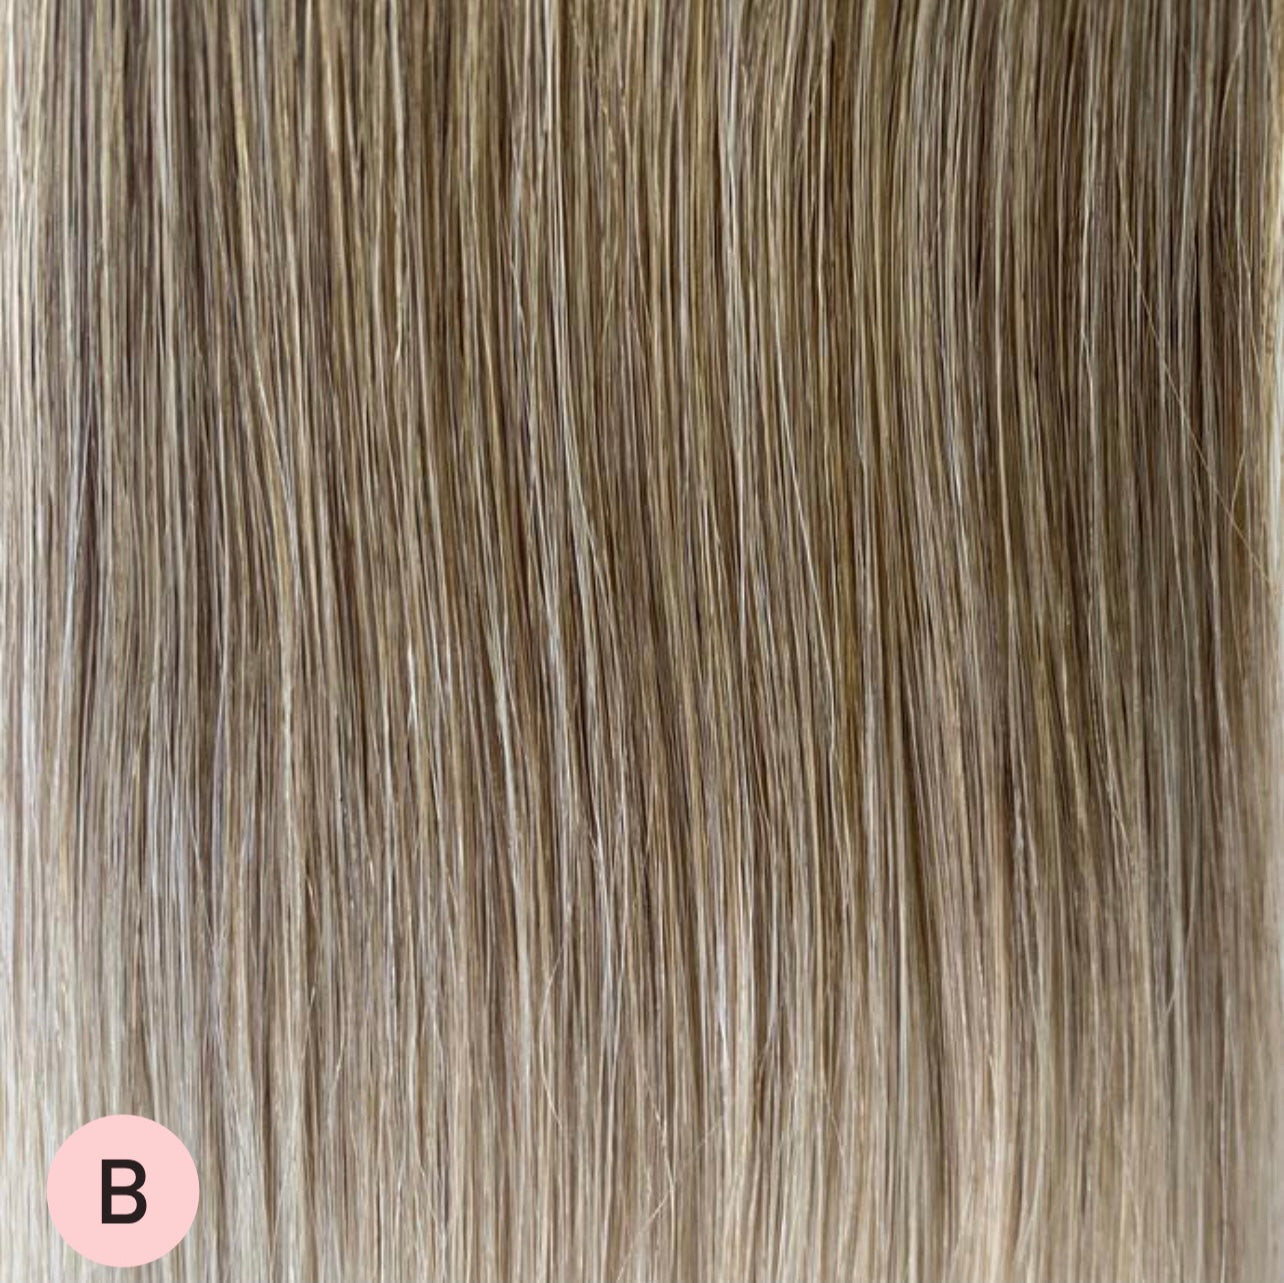 24" BALAYAGE Russian Hair Tape Extensions 20pc